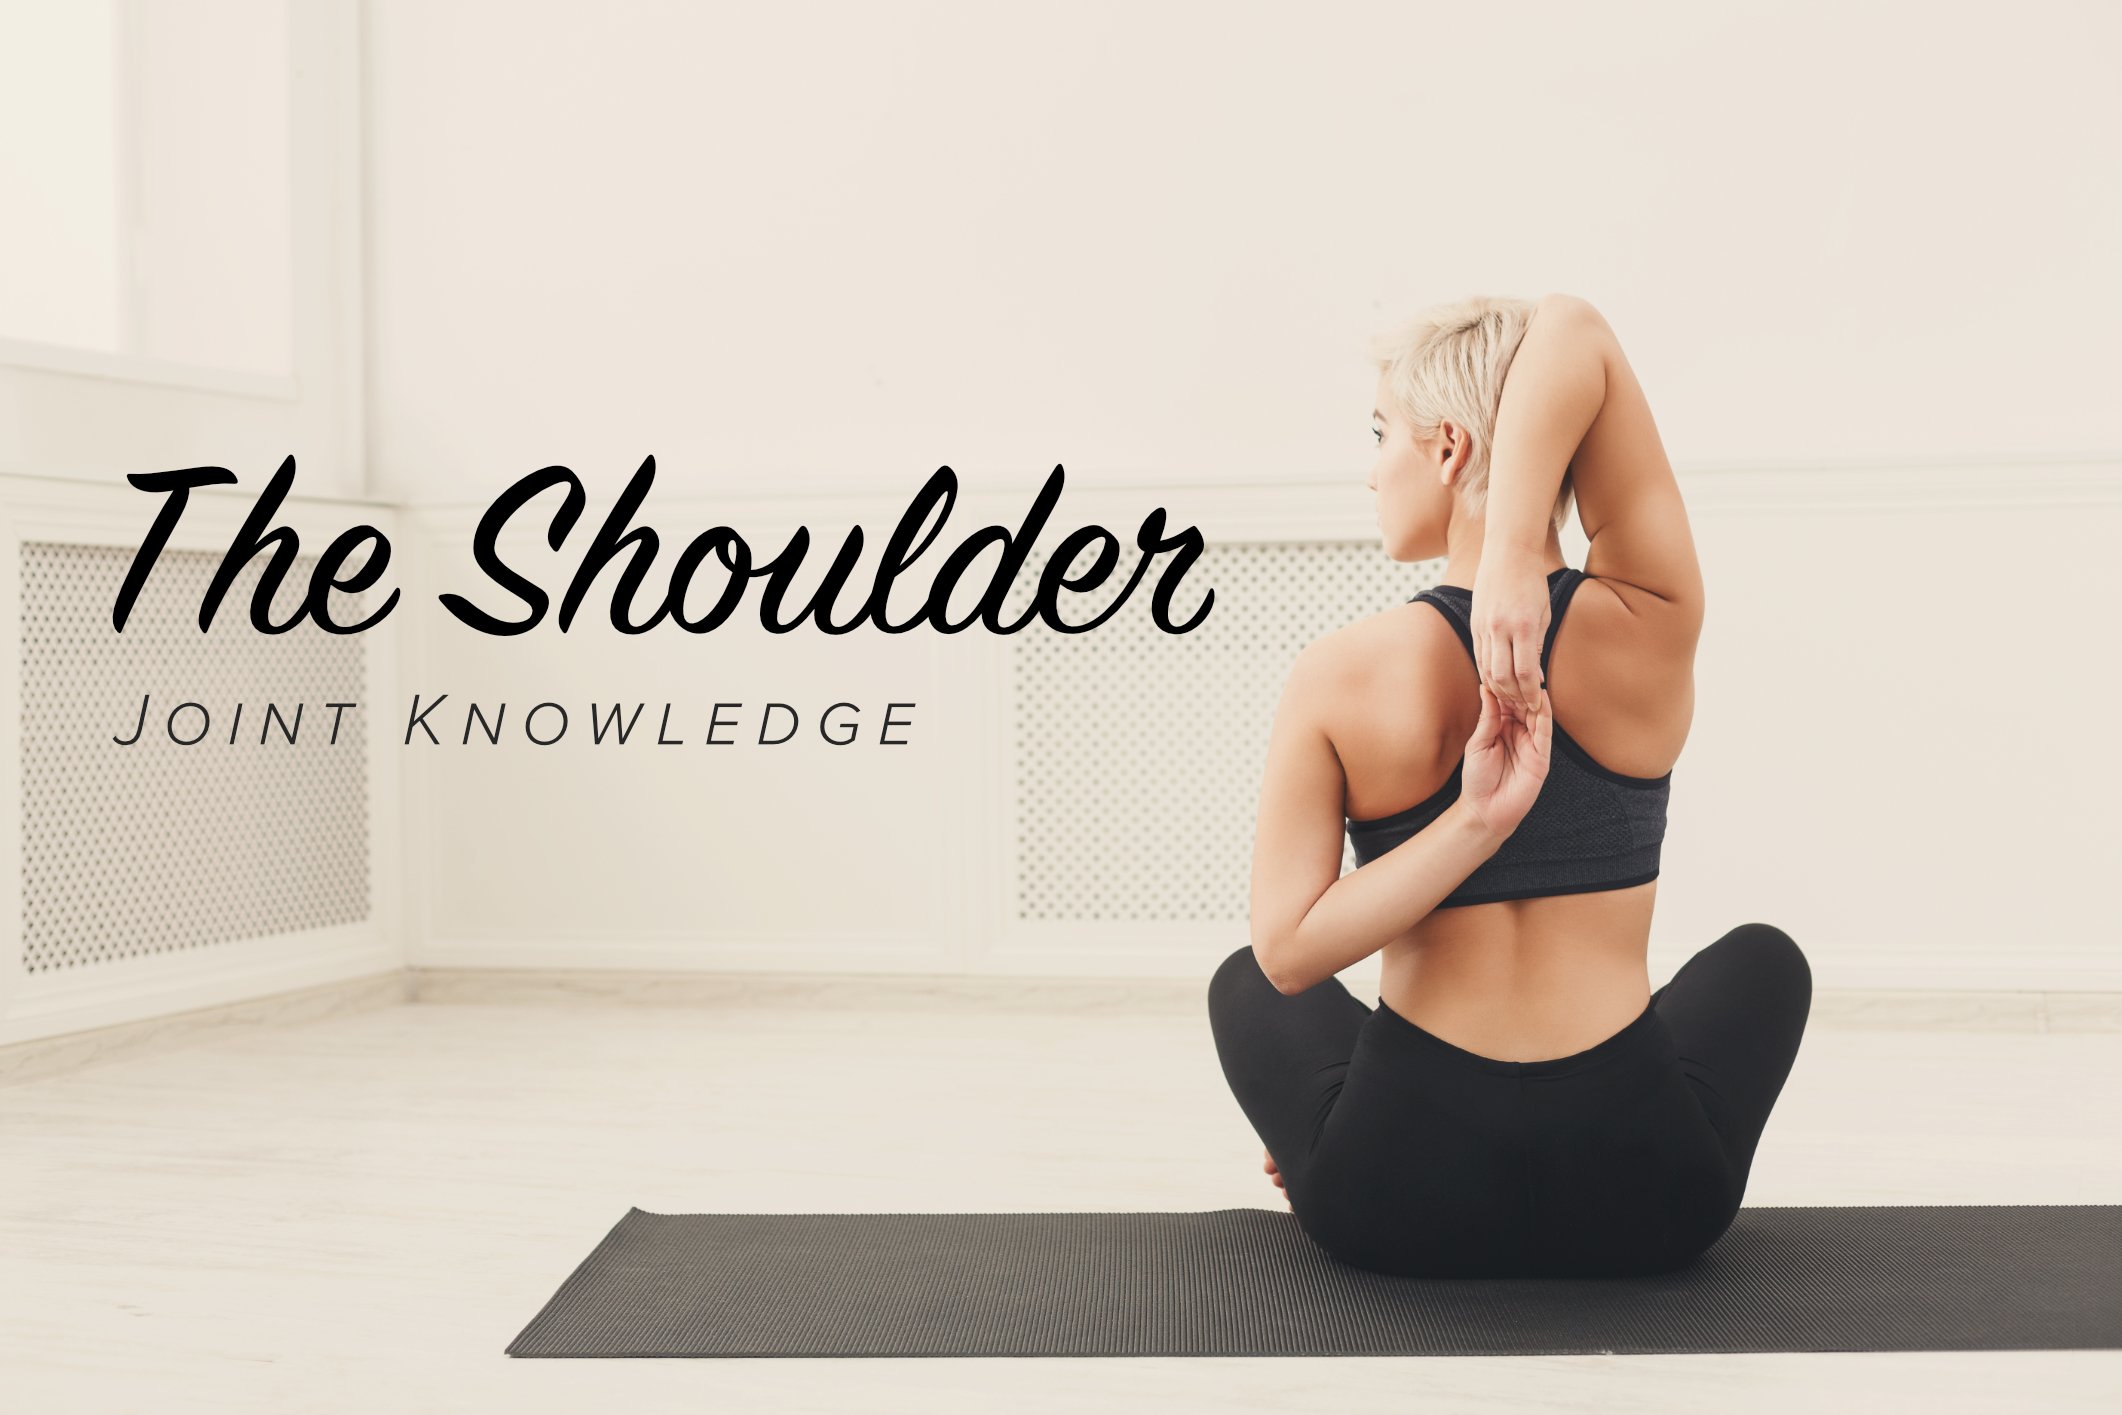 Joint Knowledge: The Shoulder